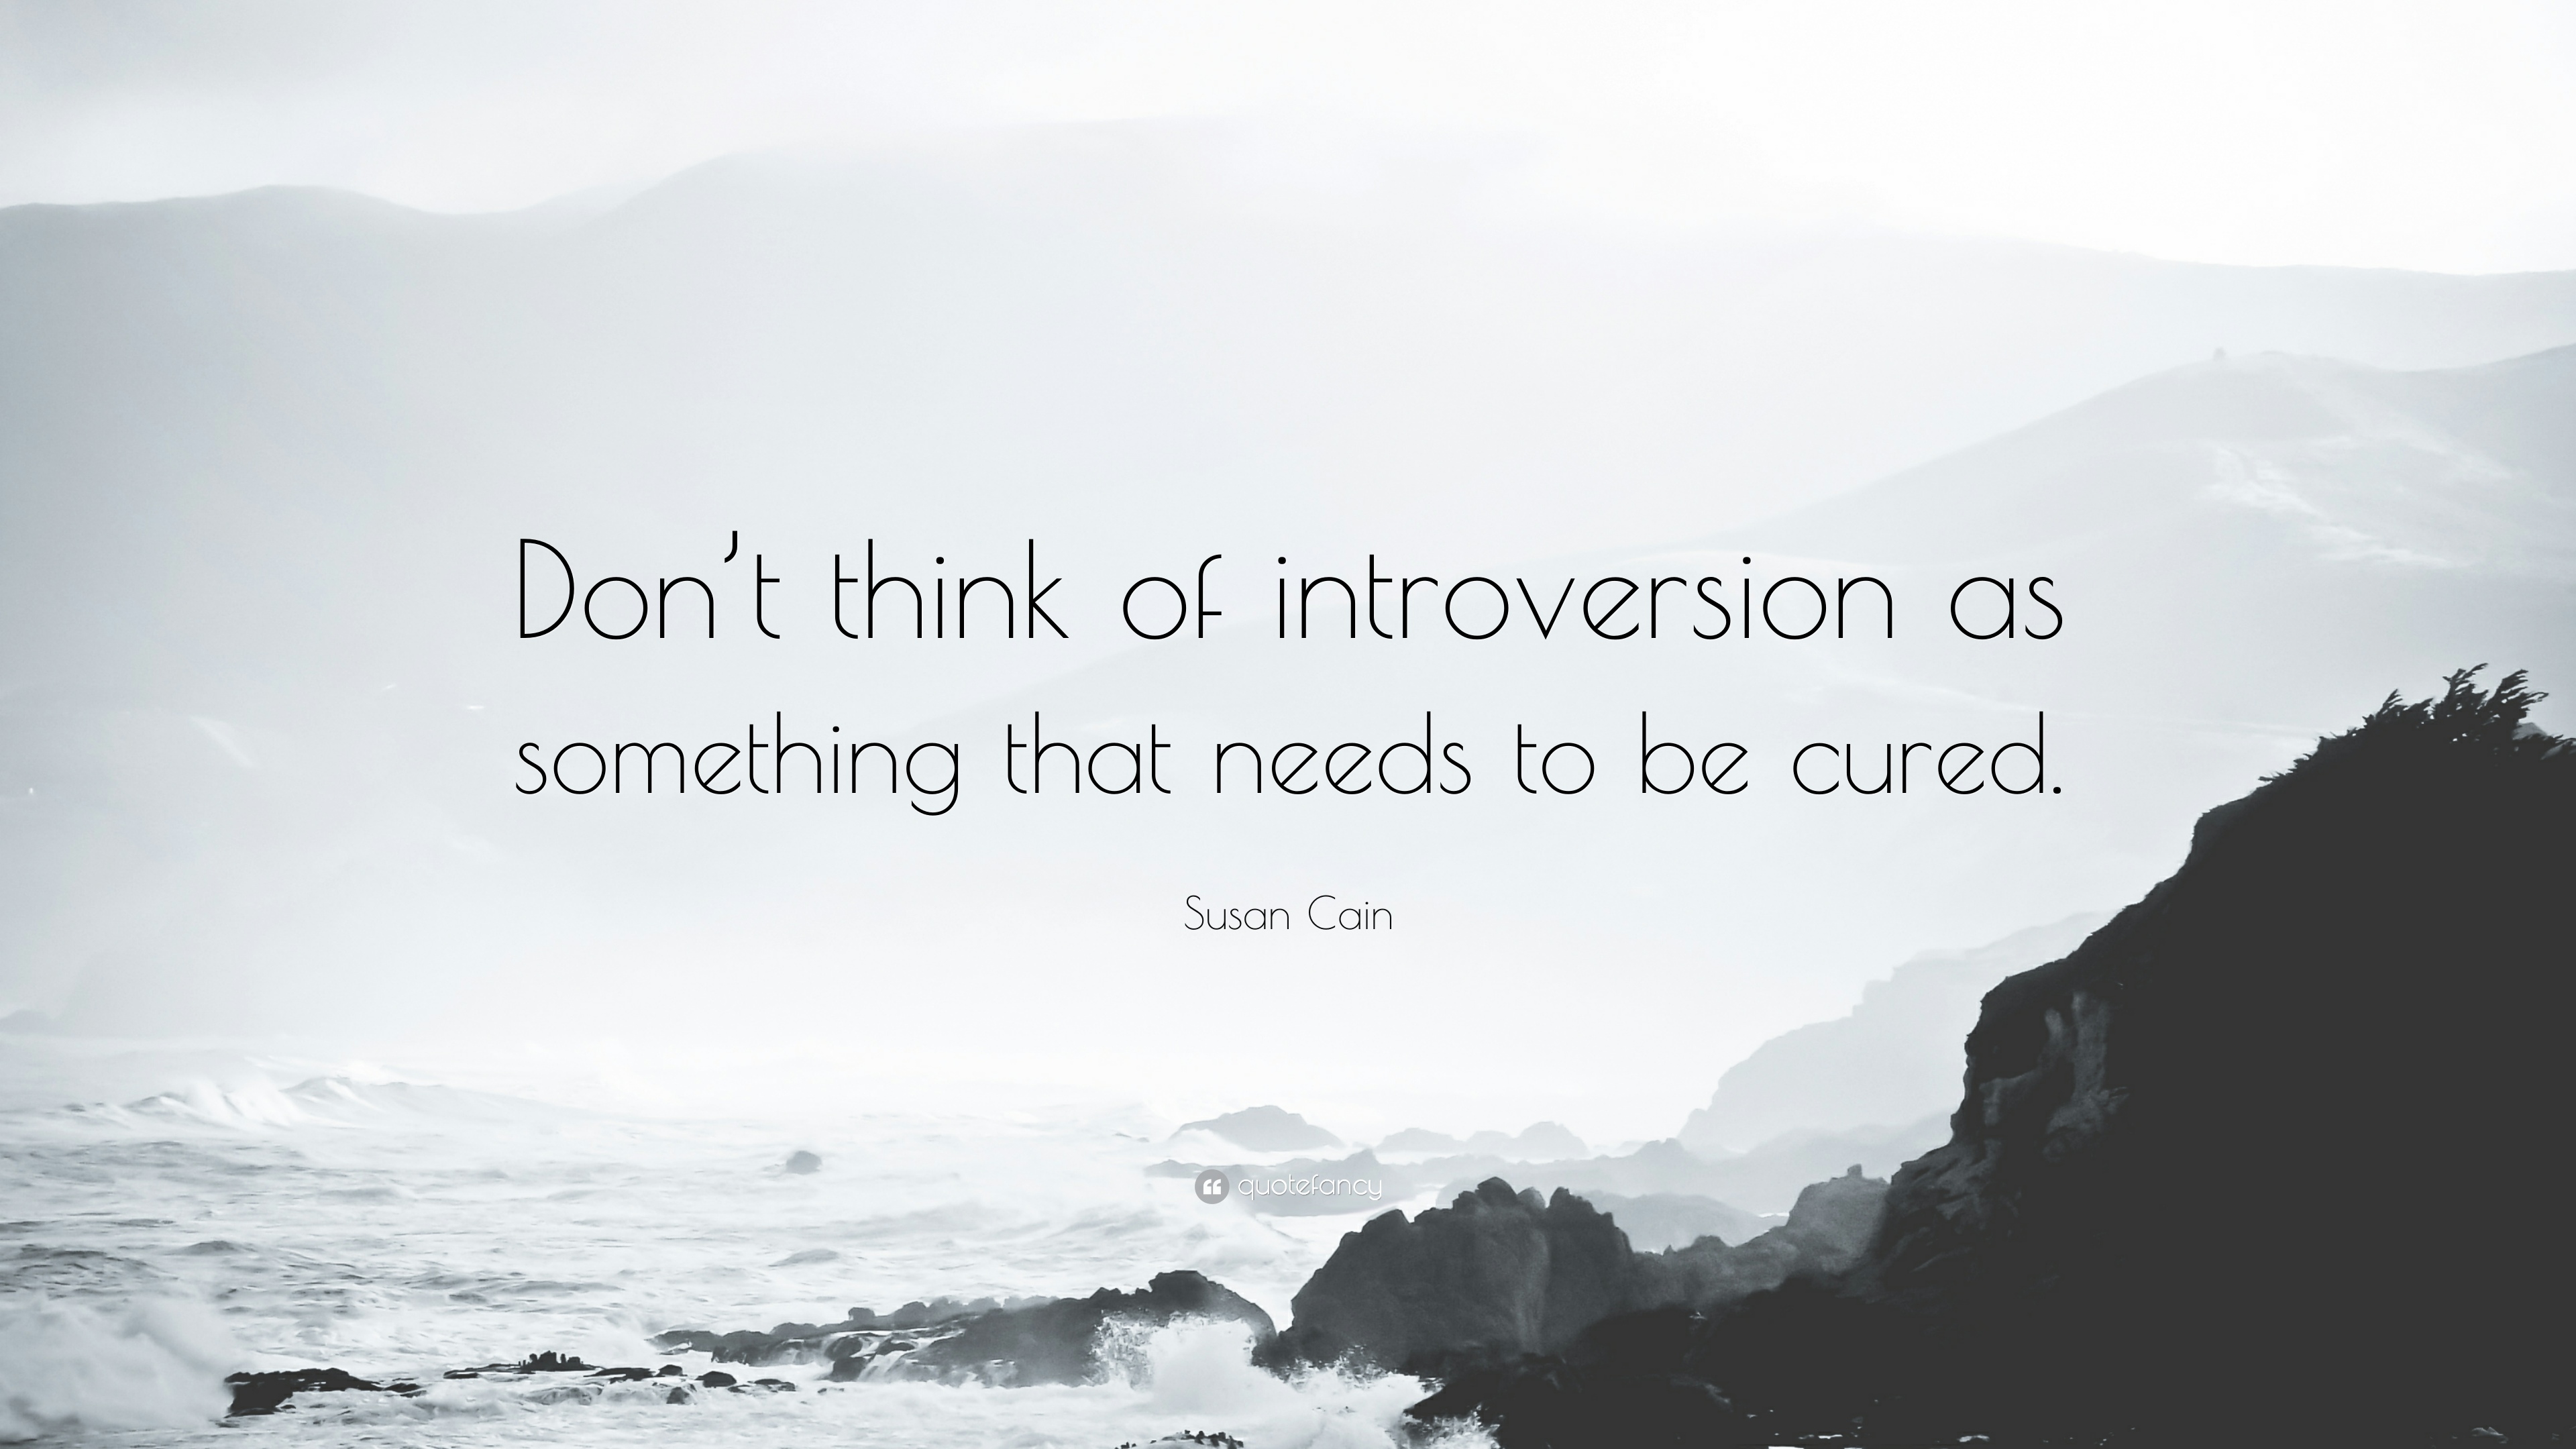 Susan Cain Quote: “Don't think of introversion as something that needs to be cured.”